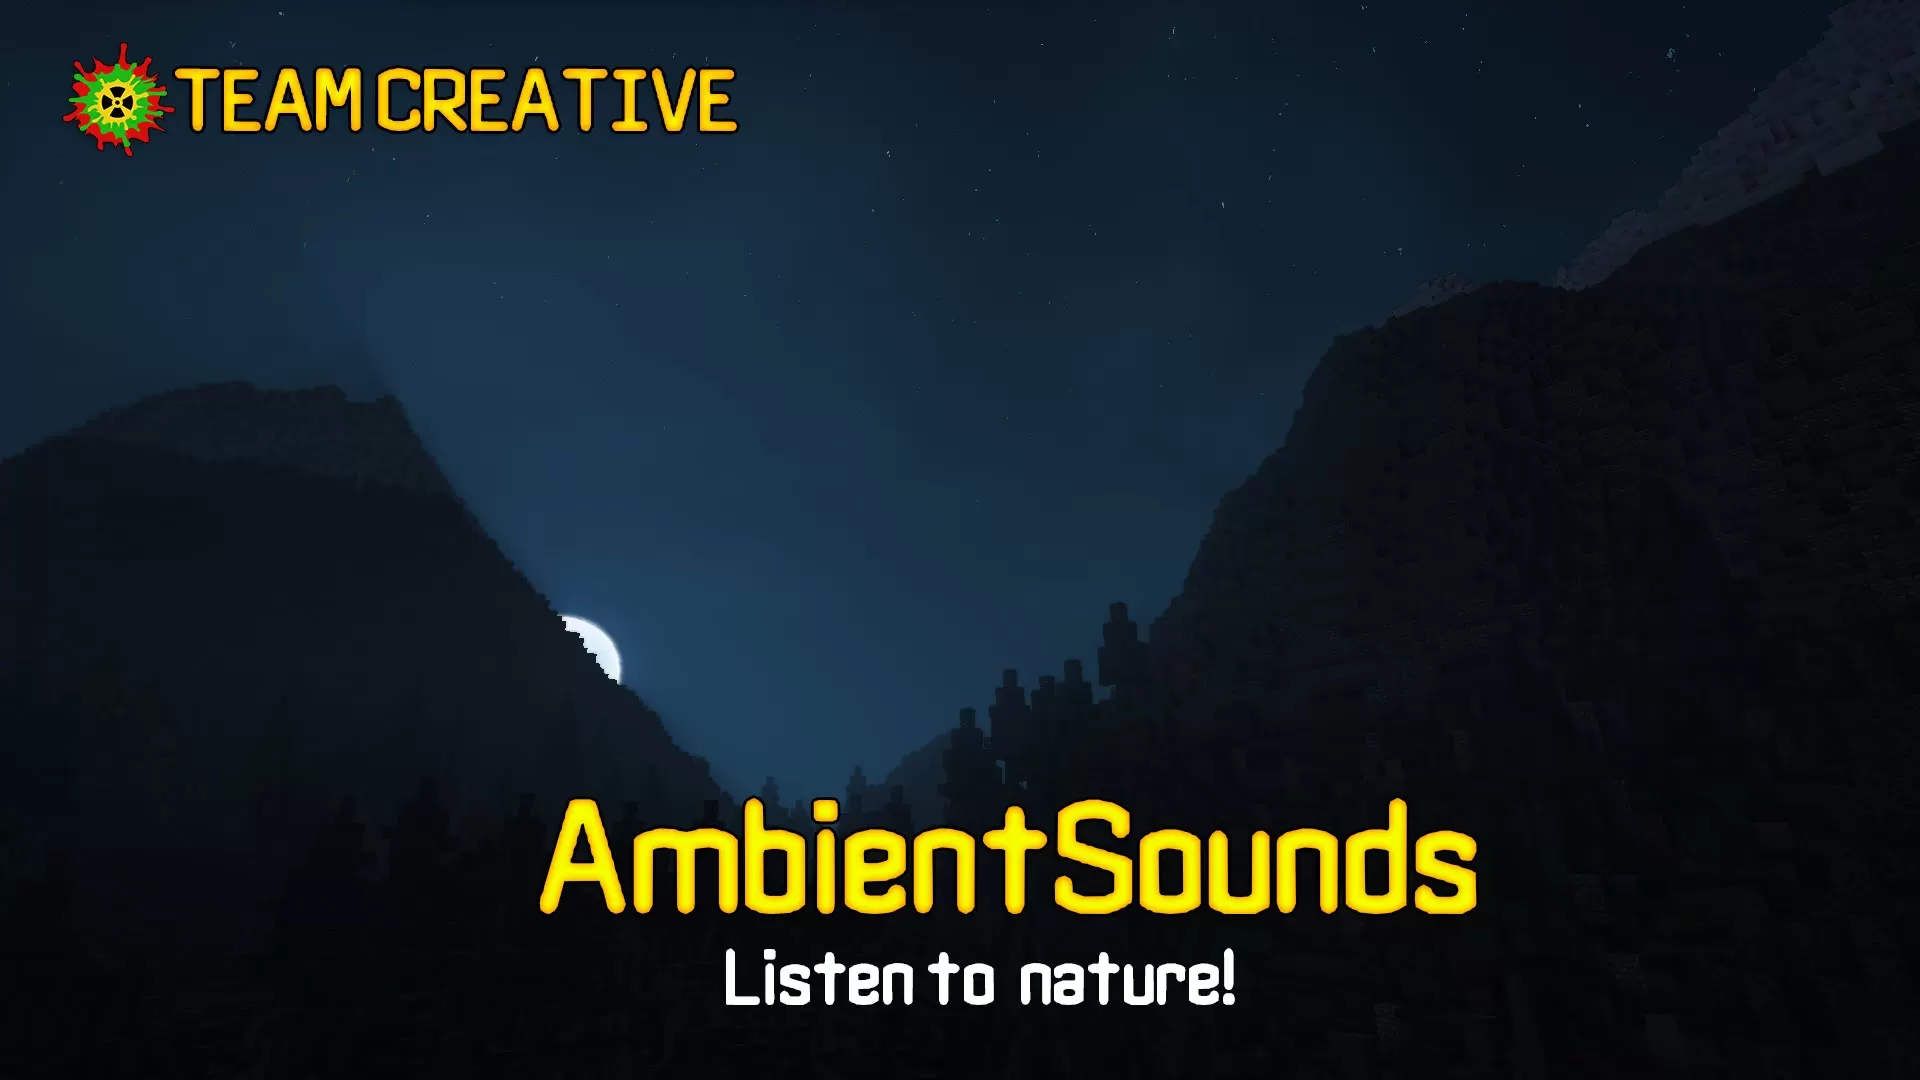 Ambient sound 4. Мод ambientsounds. Майнкрафт Ambient Sounds. Ambient Sounds мод. Ambientsounds мод на майнкрафт.